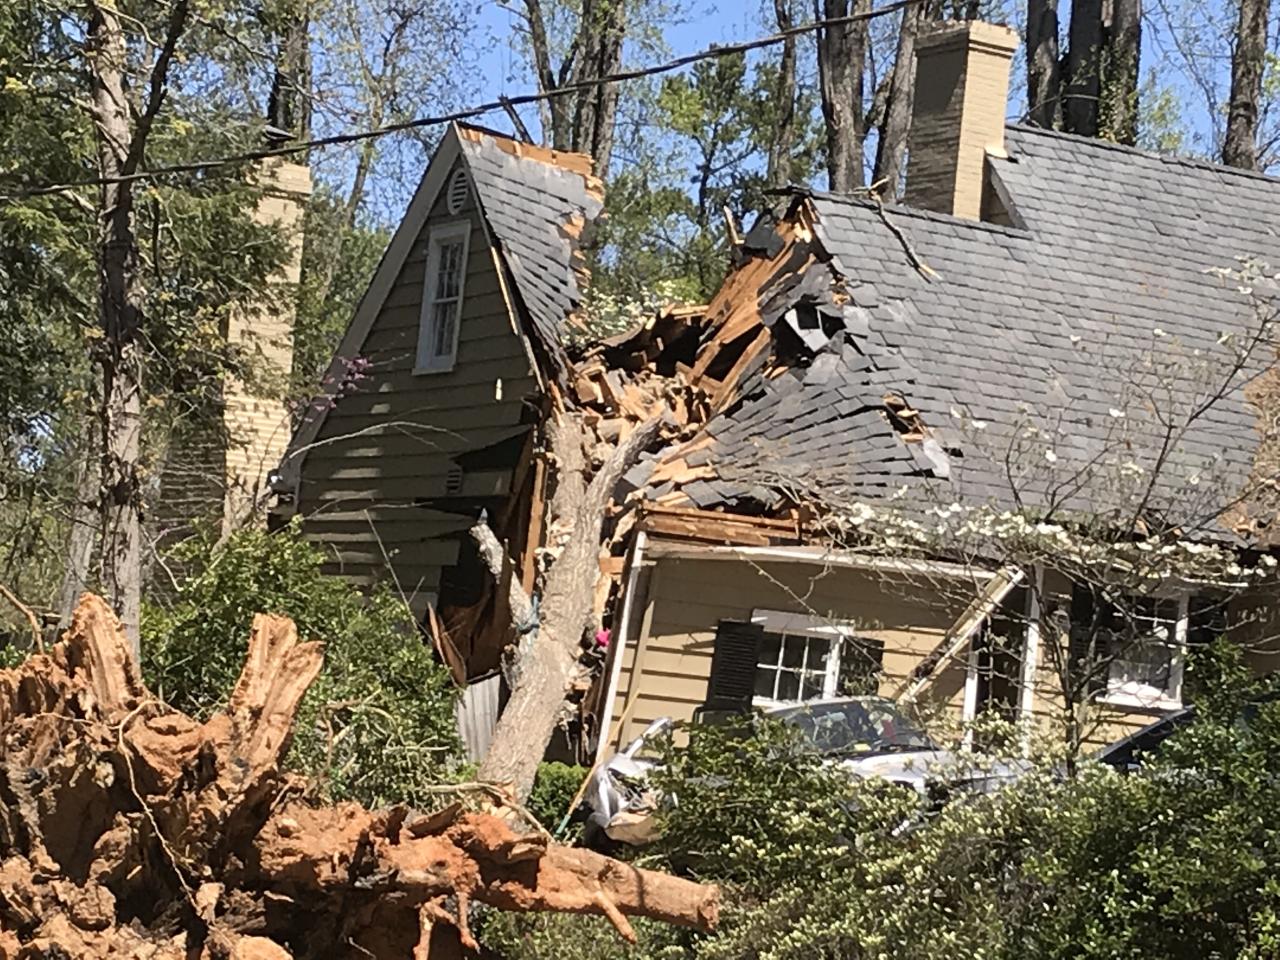 An Image of a house destroyed due to a tree falling into the roof and side wall